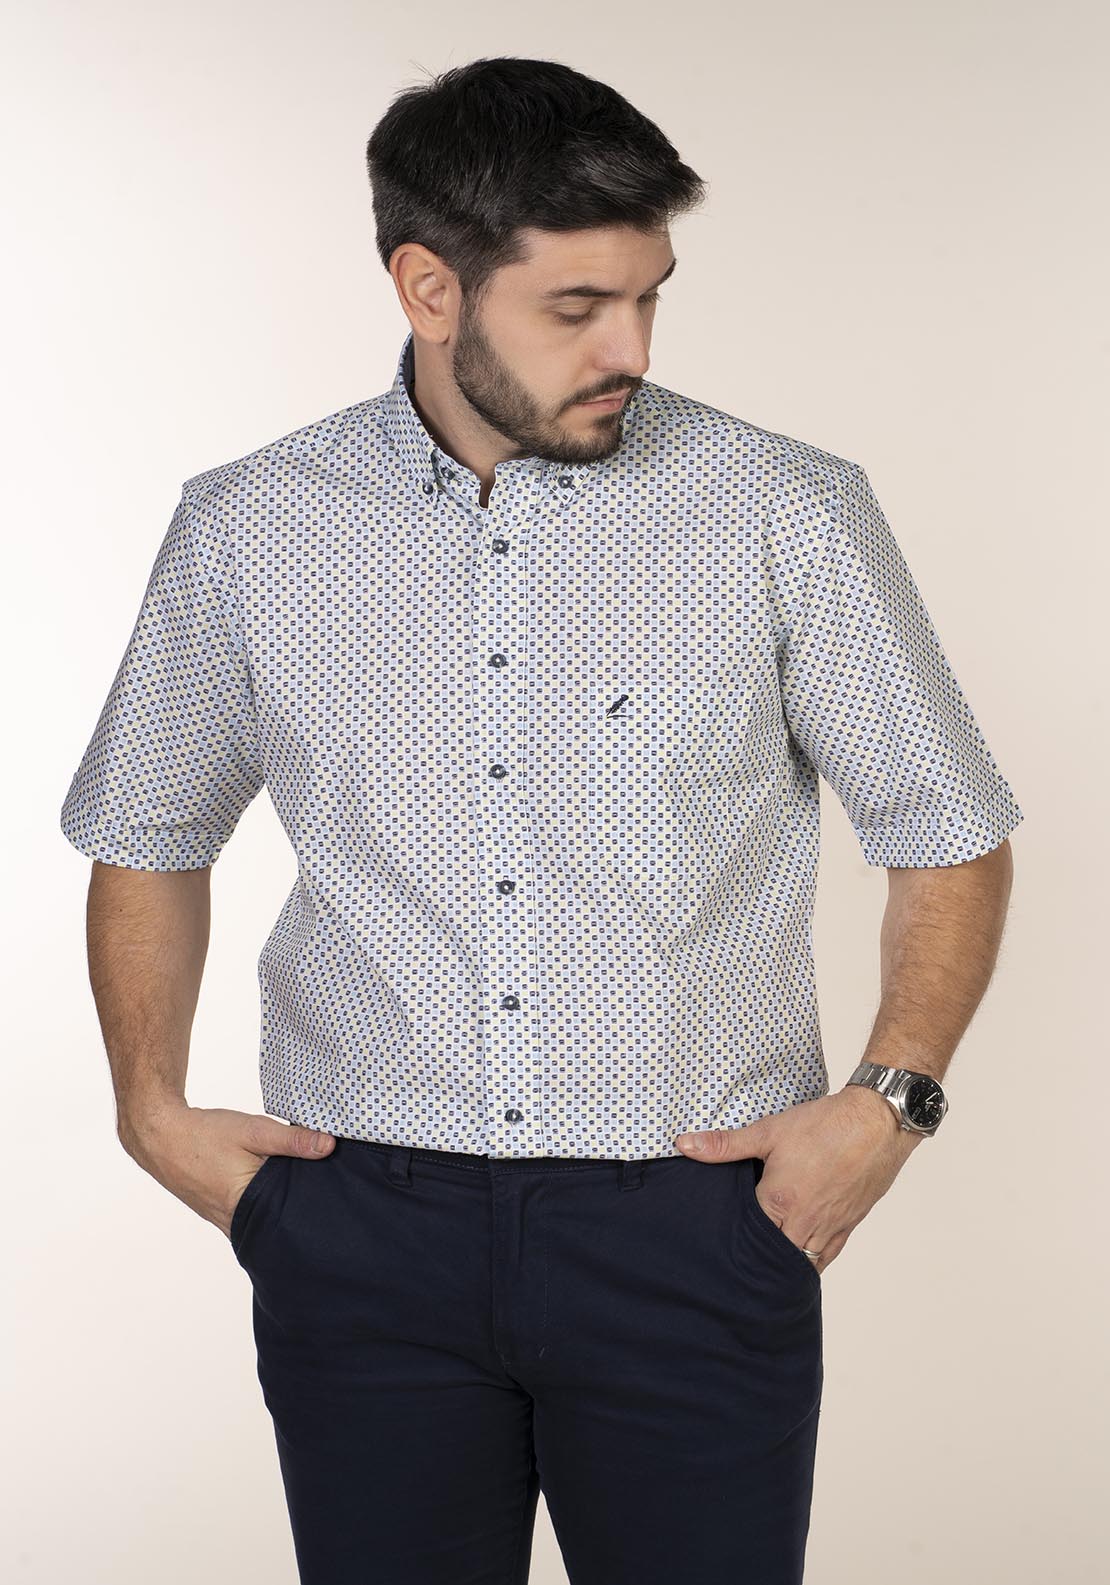 Yeats Casual Patterned Short Sleeve Shirt - Lime 2 Shaws Department Stores